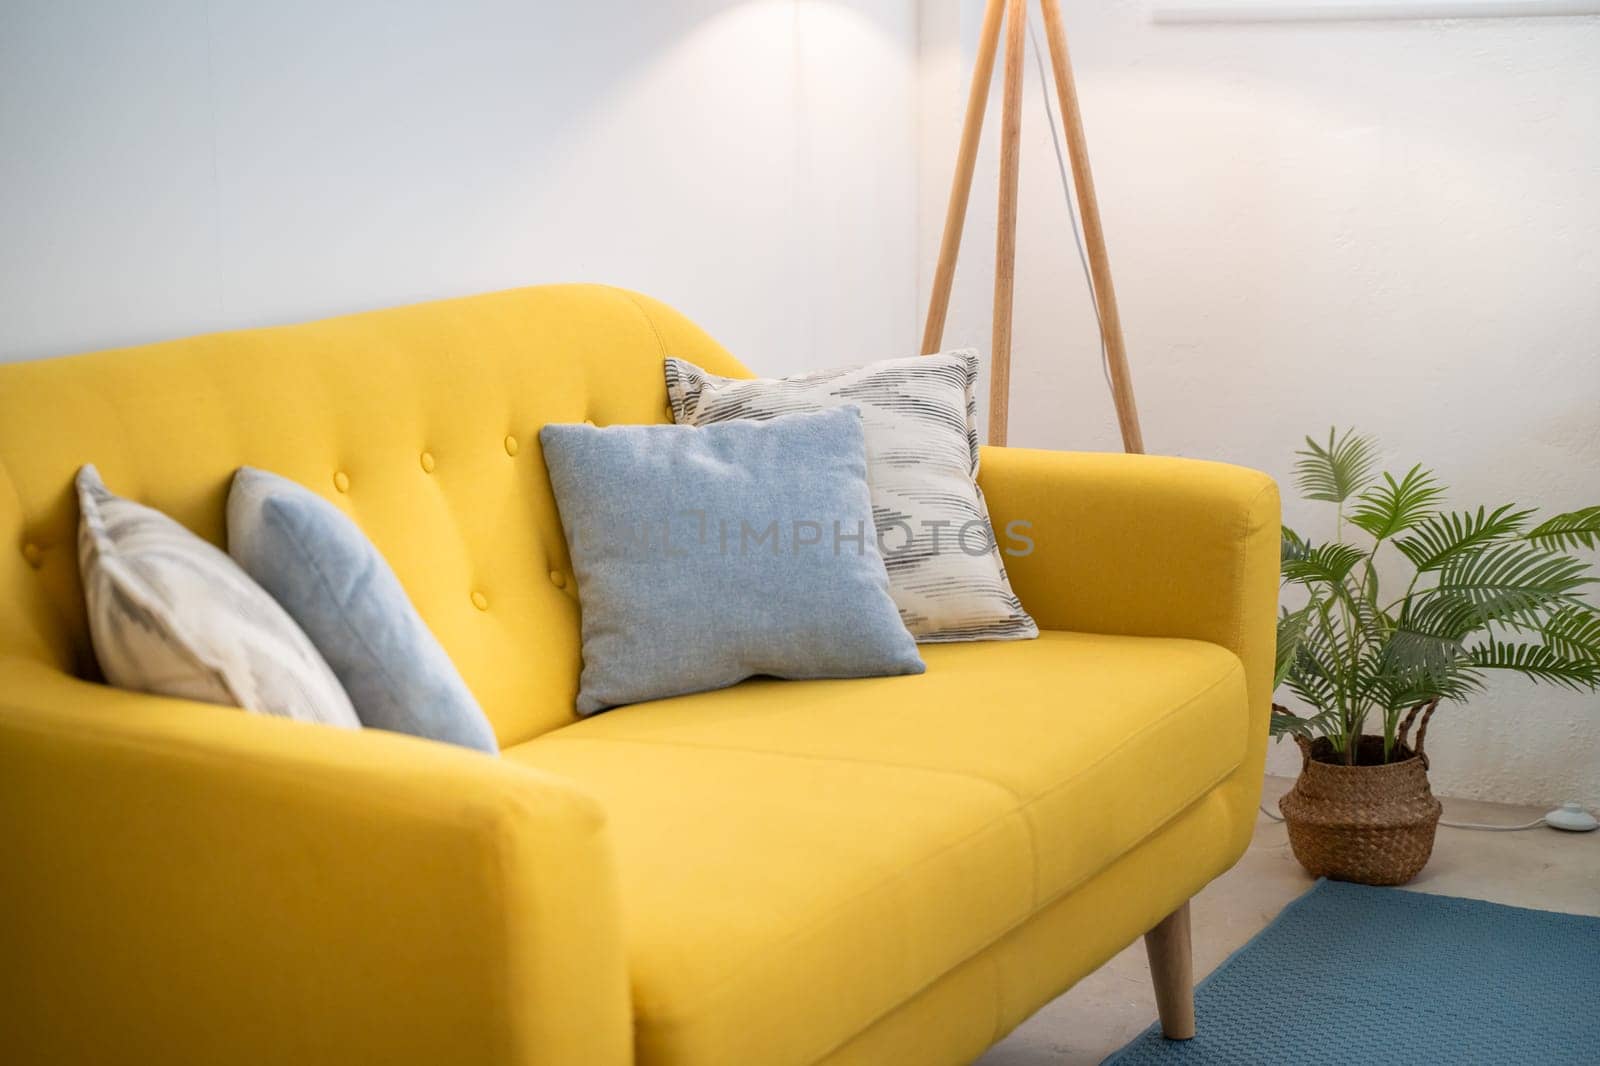 Interior design featuring a yellow couch in a living room industrial loft. High quality photo